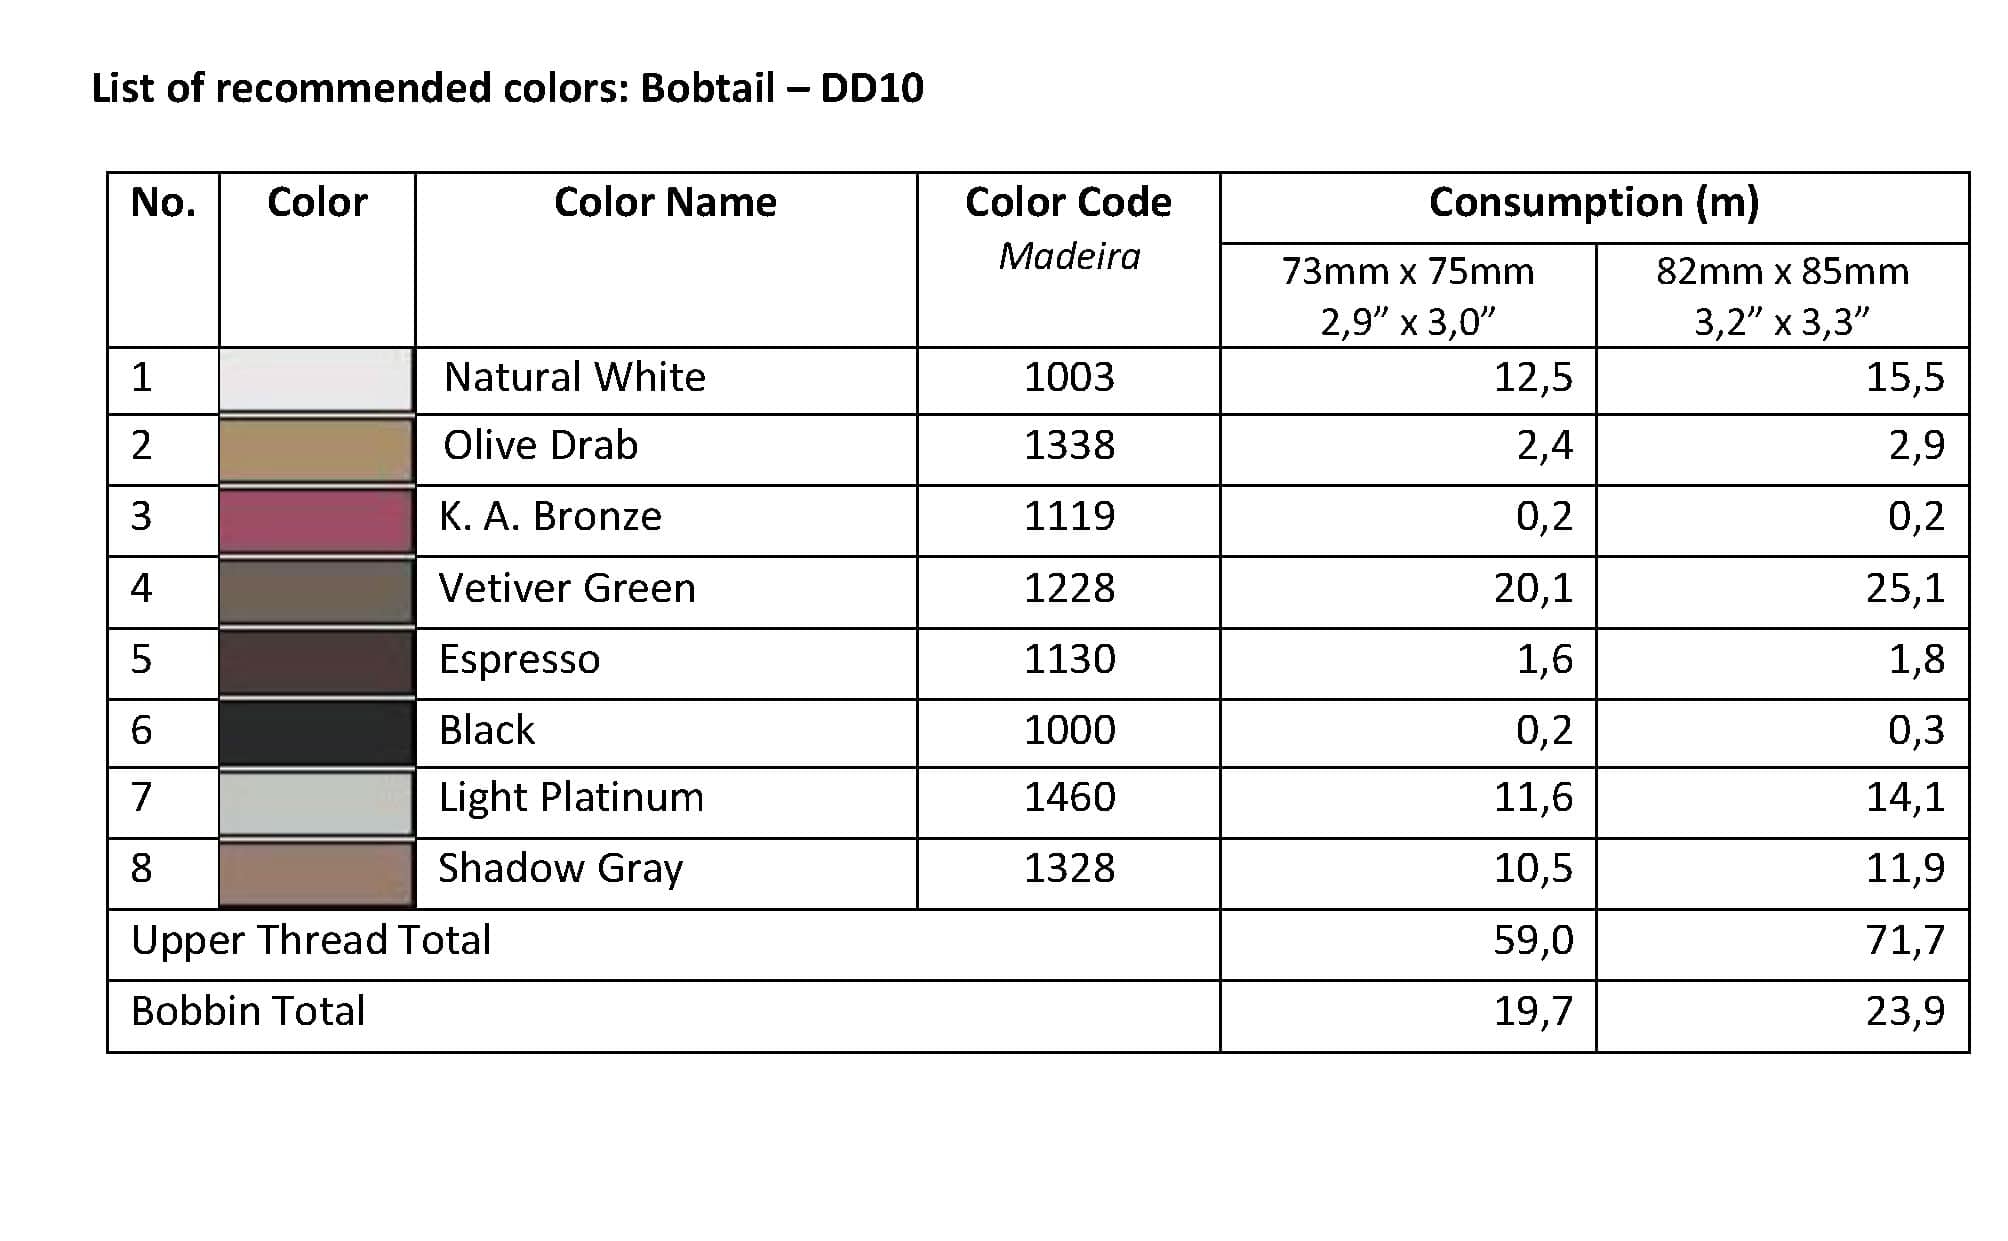 List of Recommended Colors - Bobtail DD10